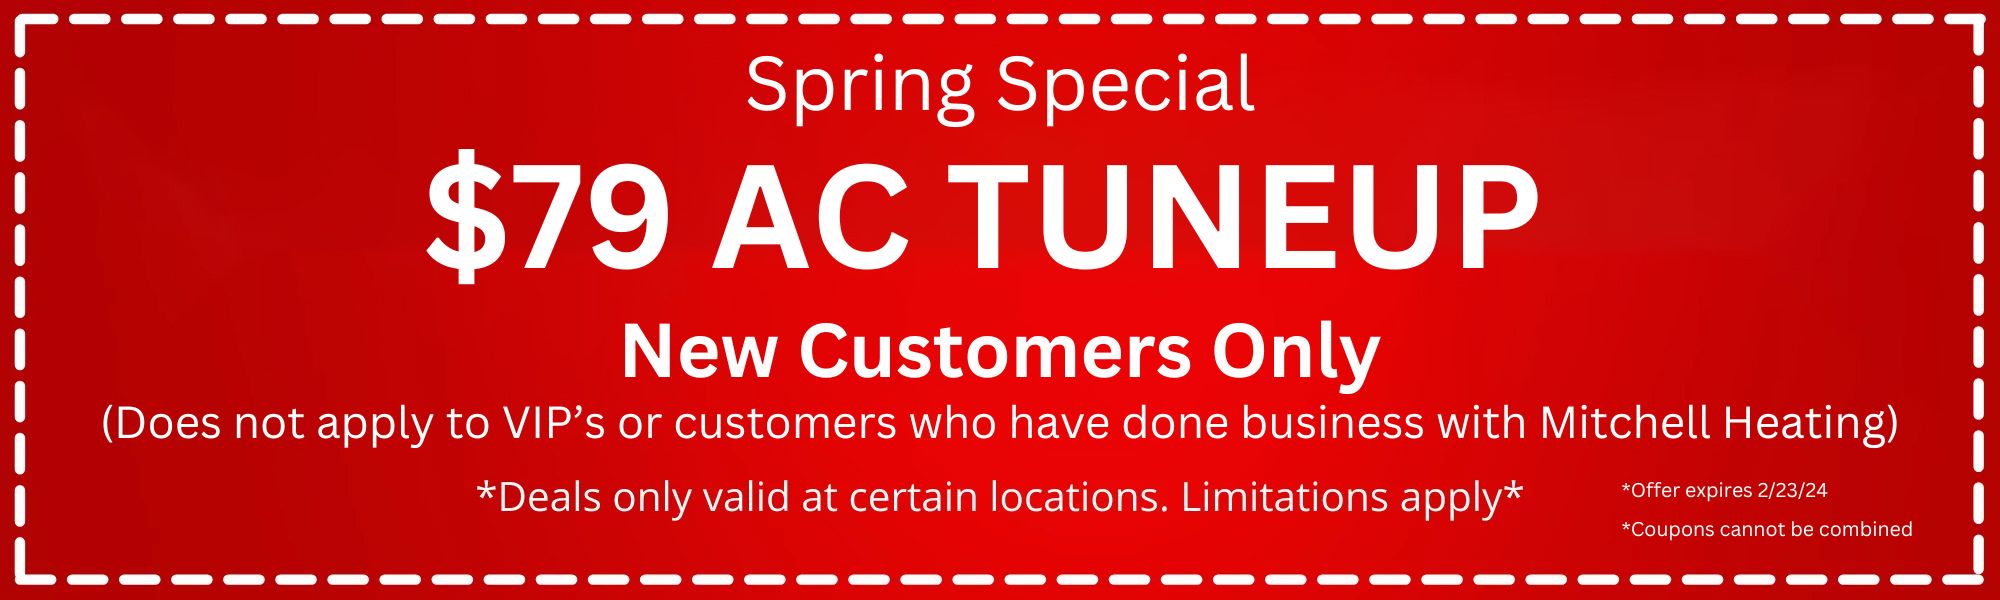 Spring Special: $79 AC Tuneup for new customers only. Does not apply to VIPs or customers who have done business with Mitchell Heating. Deals only valid at certain locations. Limitations apply. Offer expires 2/23/24. Coupons cannot be combined.